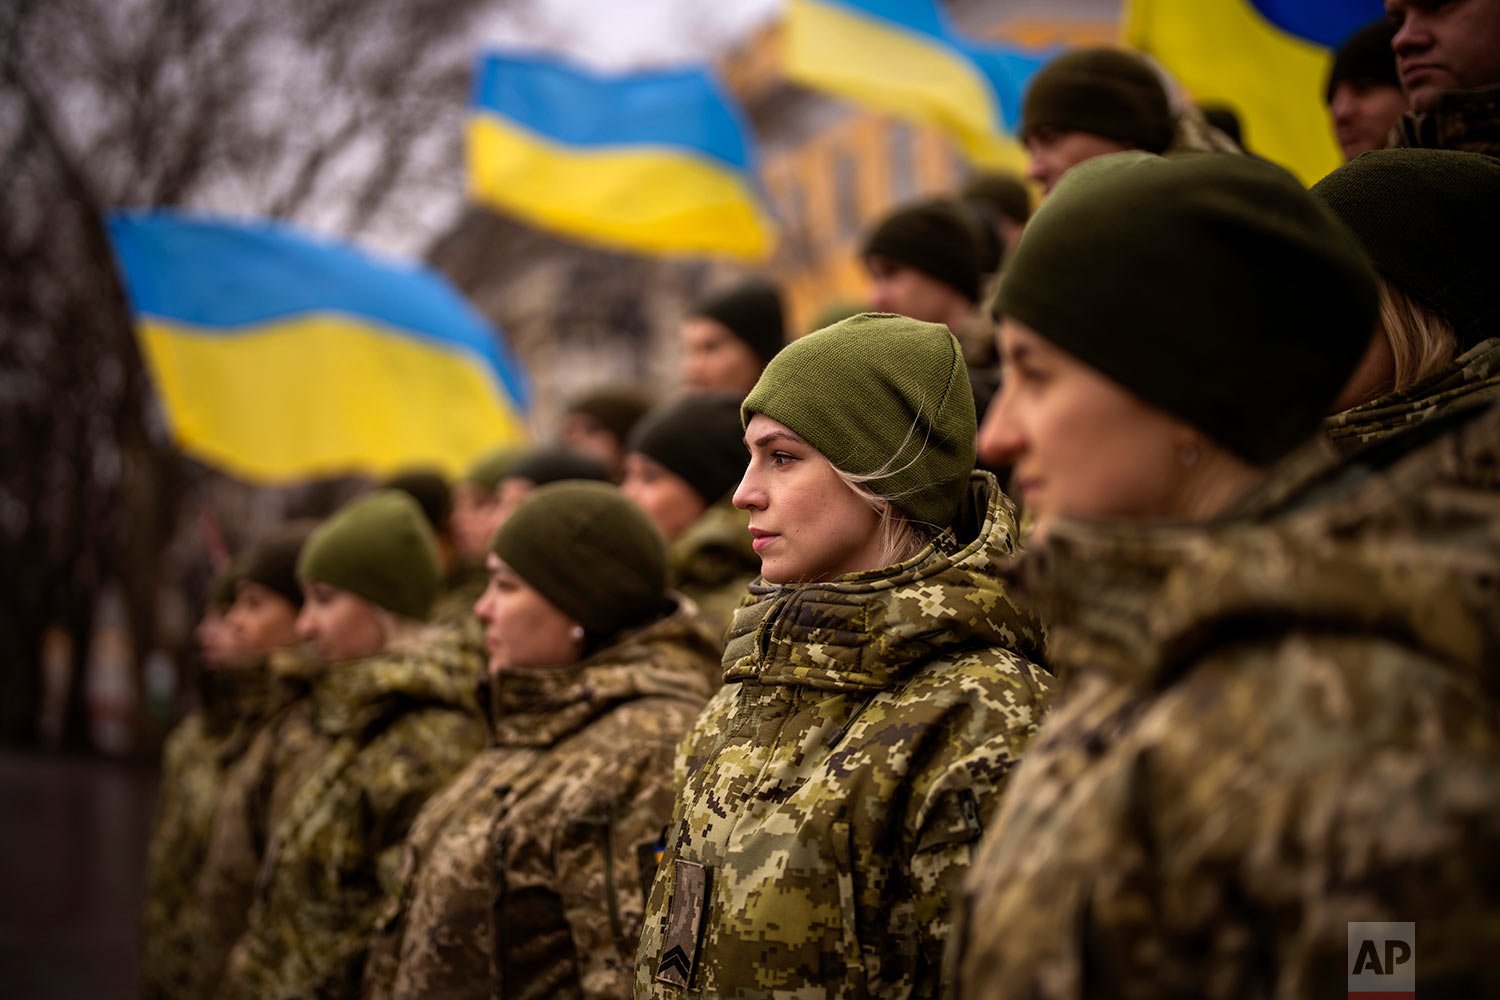  Ukrainian Army soldiers pose for a photo as they gather to celebrate a Day of Unity in Odessa, Ukraine, Wednesday, Feb. 16, 2022. (AP Photo/Emilio Morenatti) 